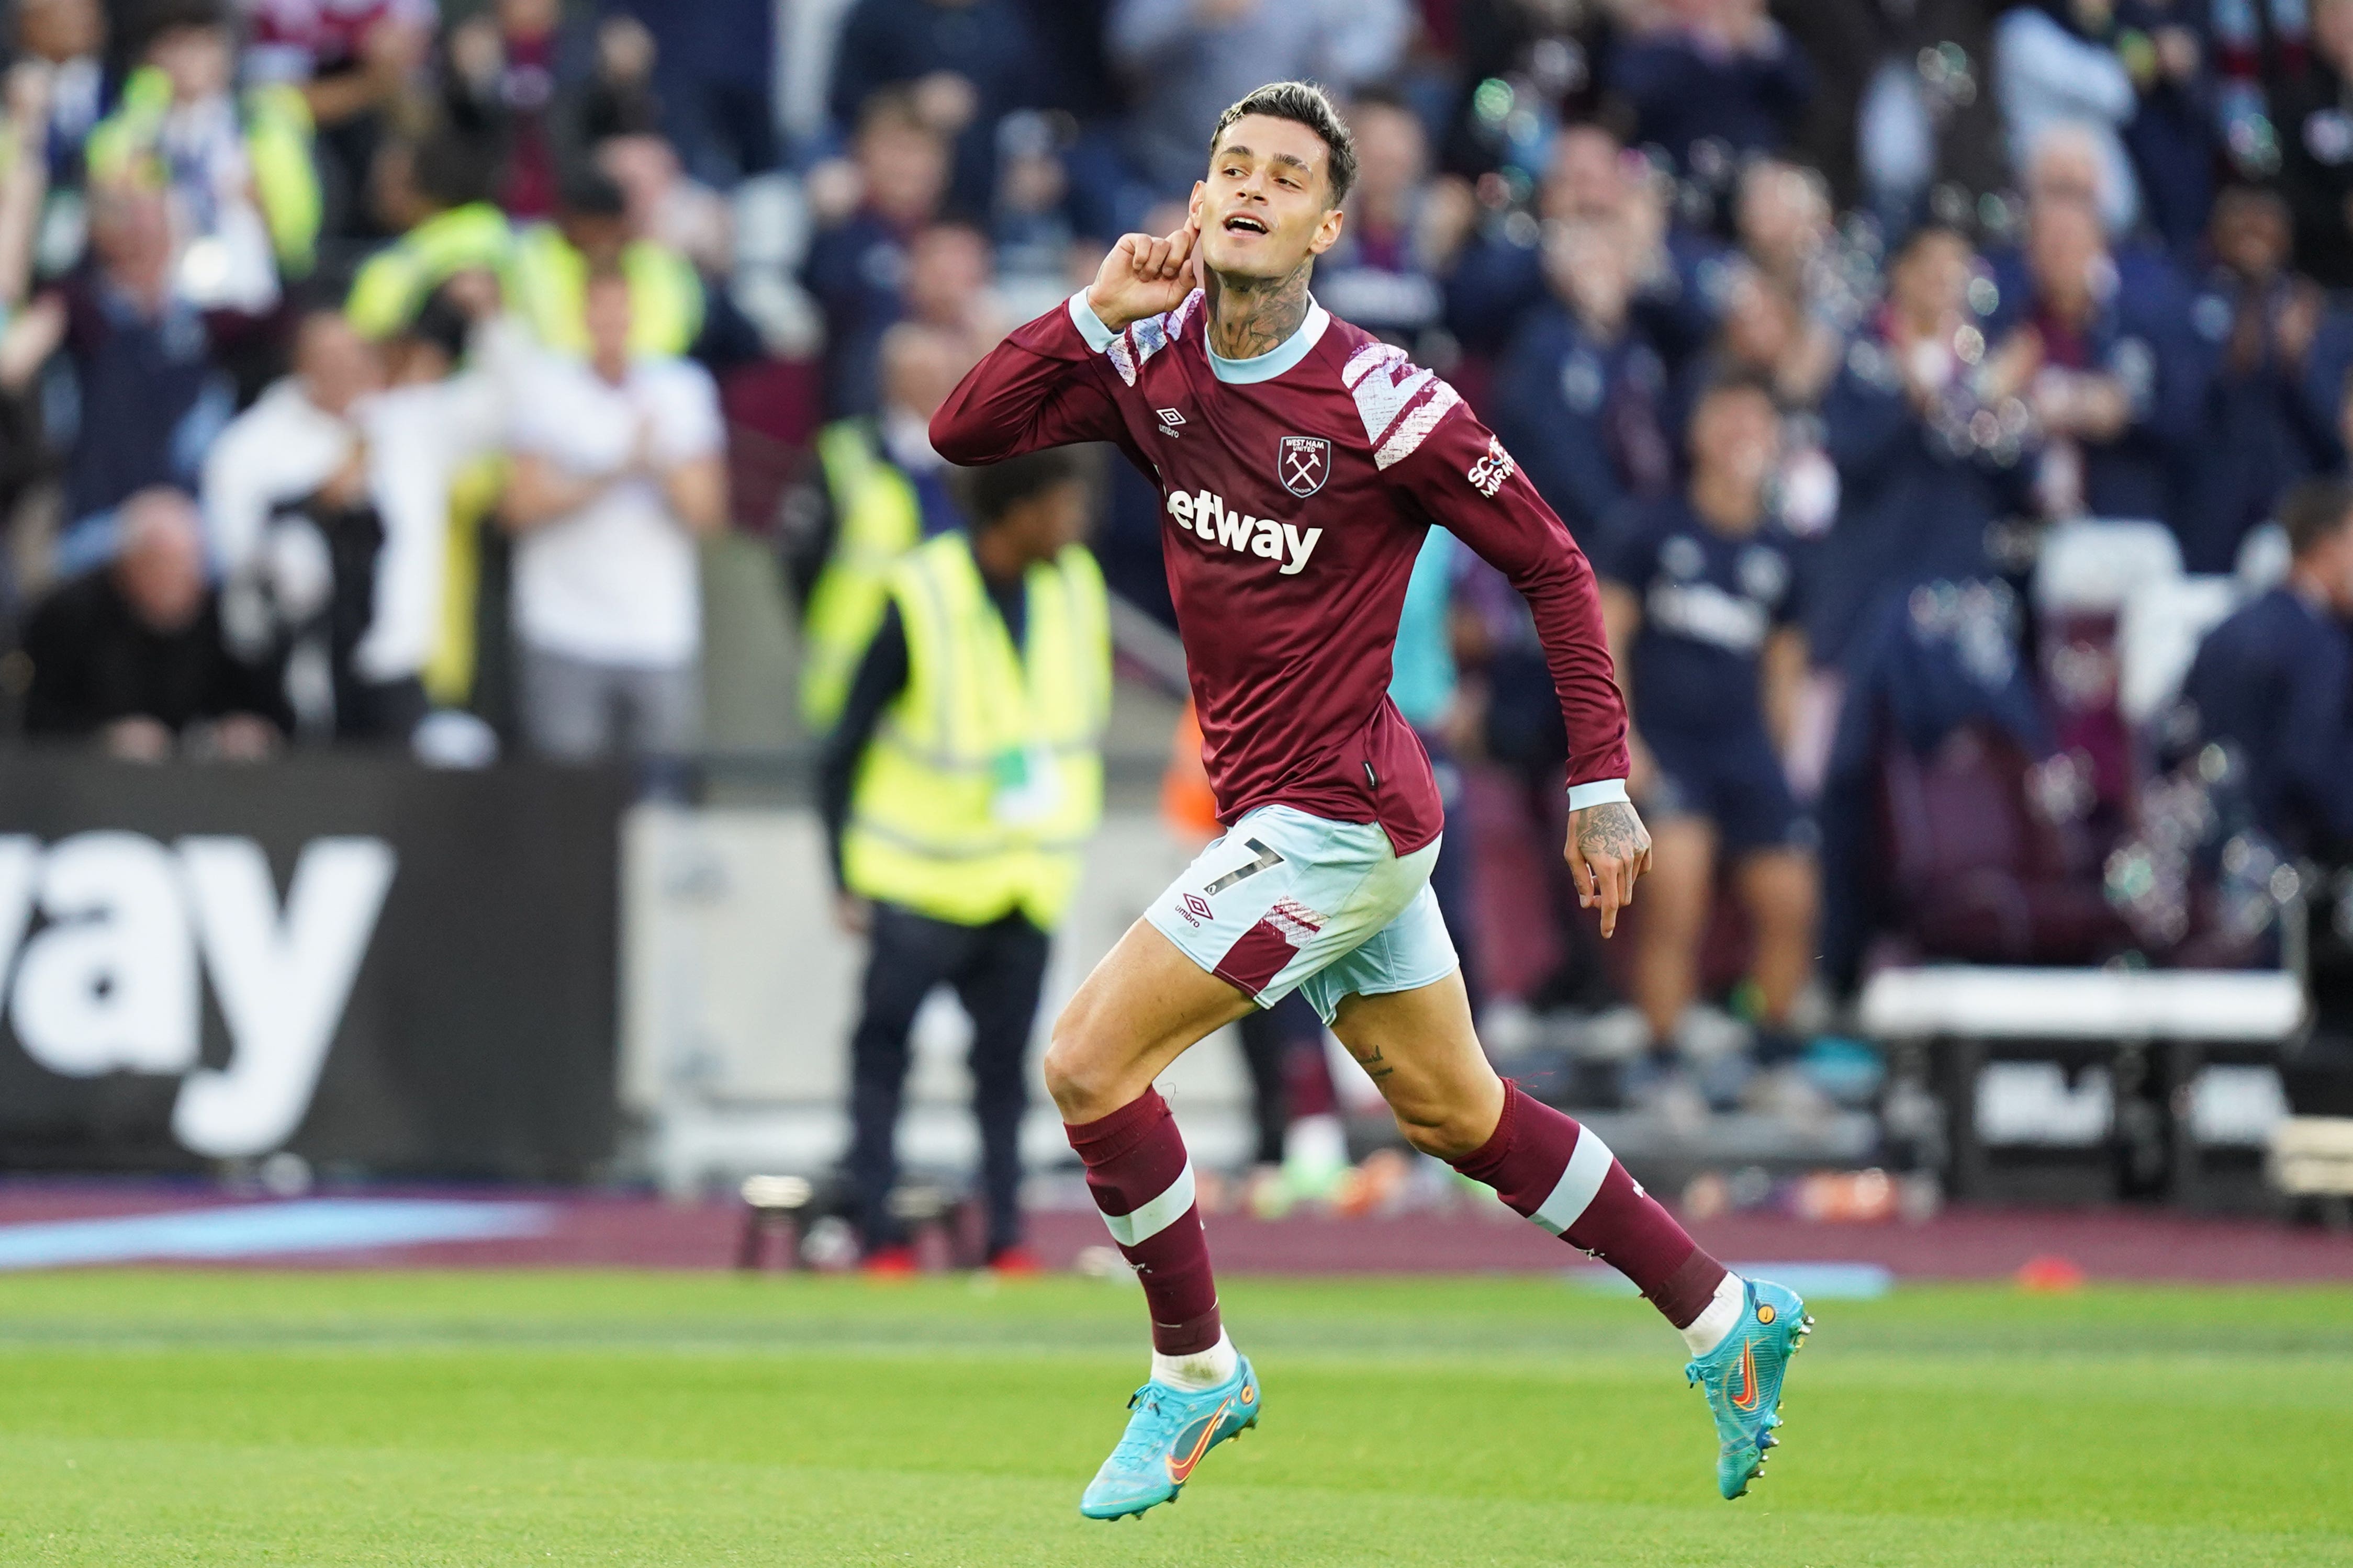 Gianluca Scamacca opened the scoring in West Ham’s 2-0 win over Wolves